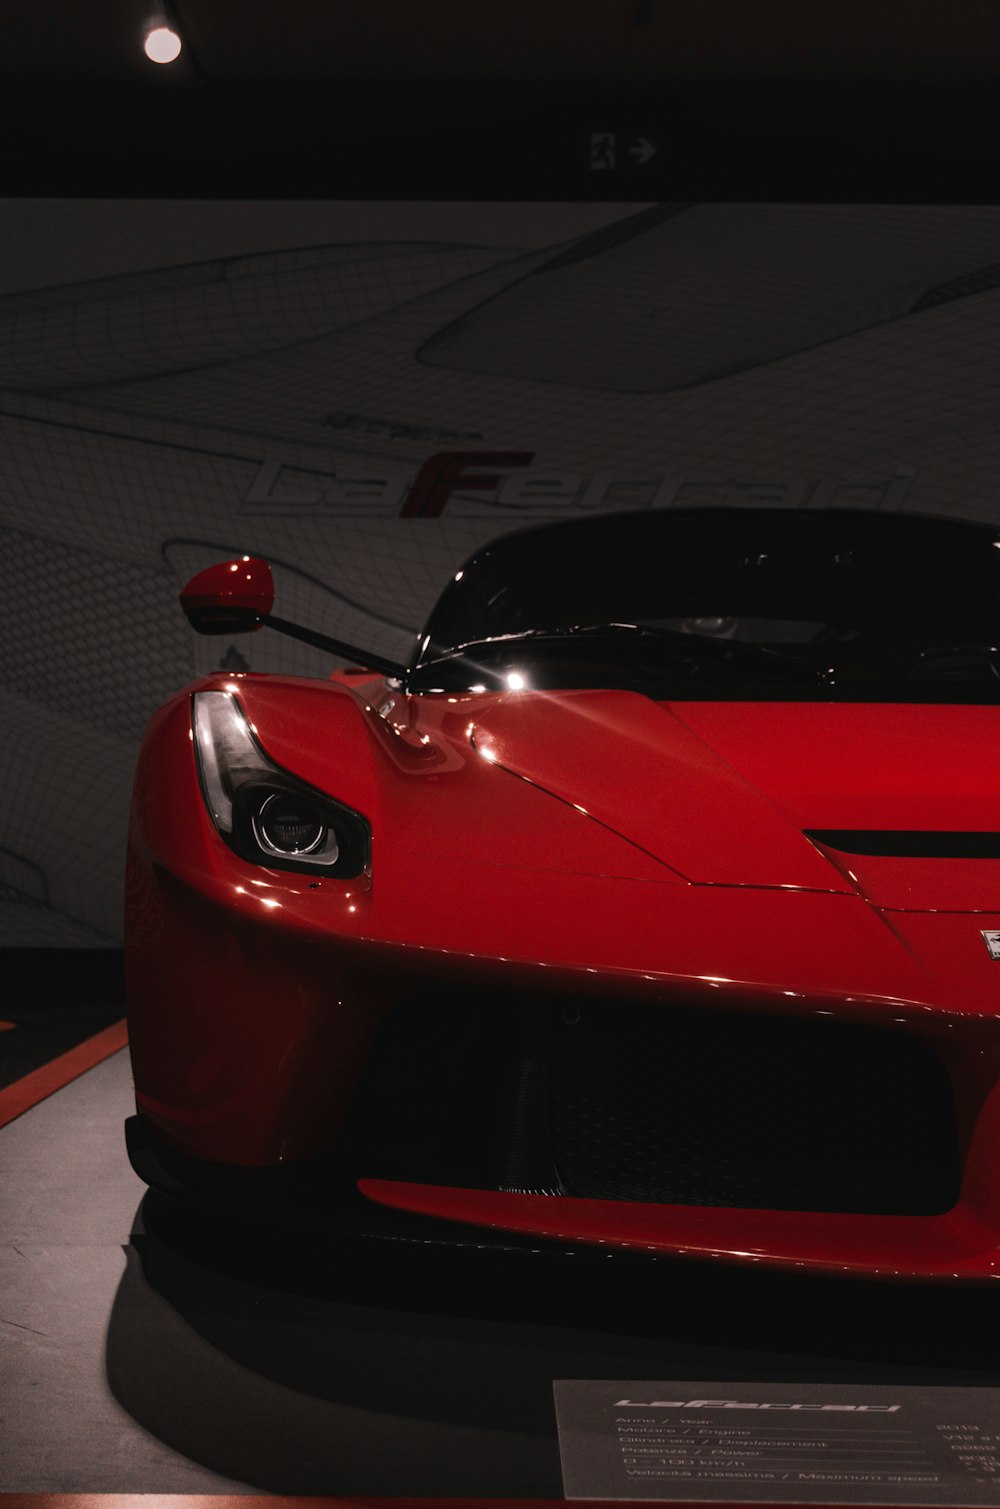 the front of a red sports car